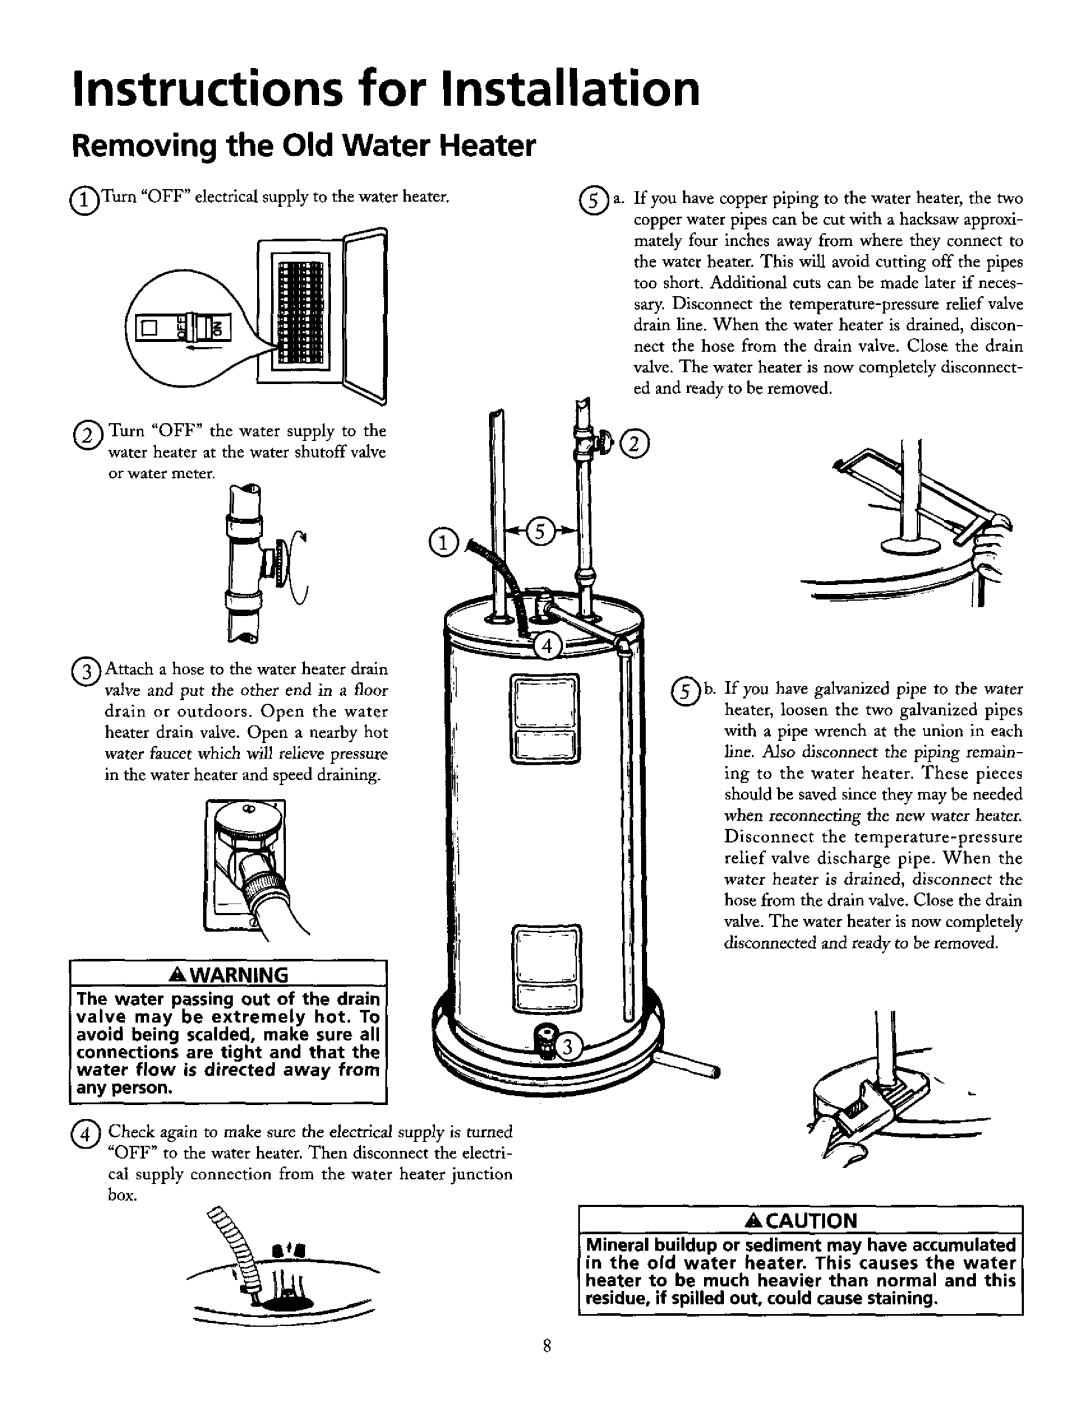 Maytag HE2940T, HE3940T, HE3940L, HE3950T, HE3940S Instructions for Installation, Removing the Old Water Heater, mtlIACAUTION 